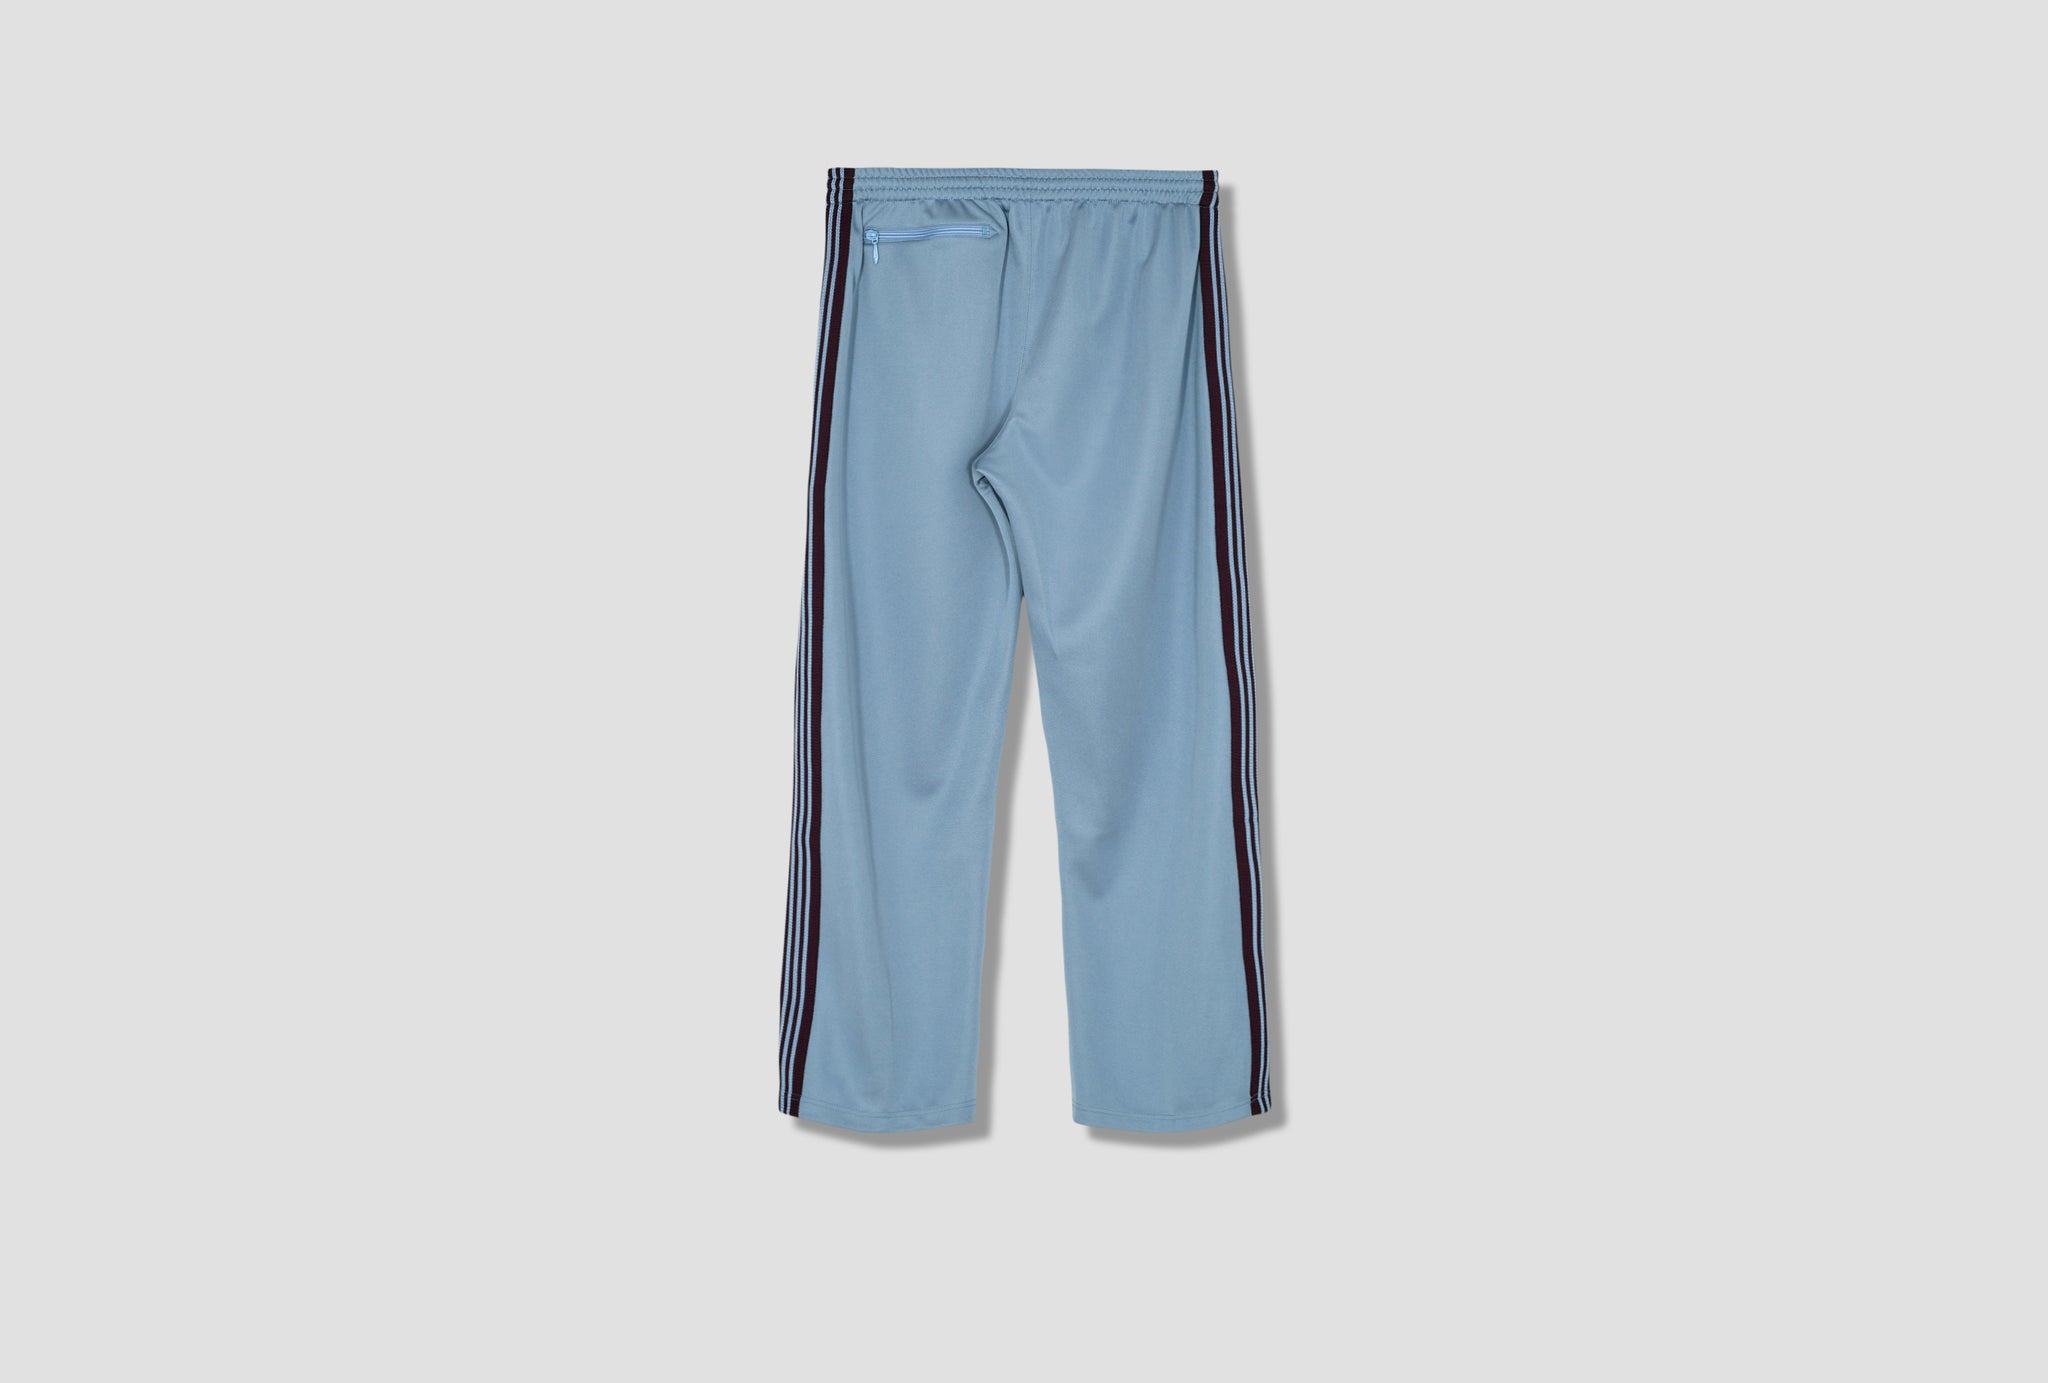 TRACK PANT - POLY SMOOTH KP220 Light blue